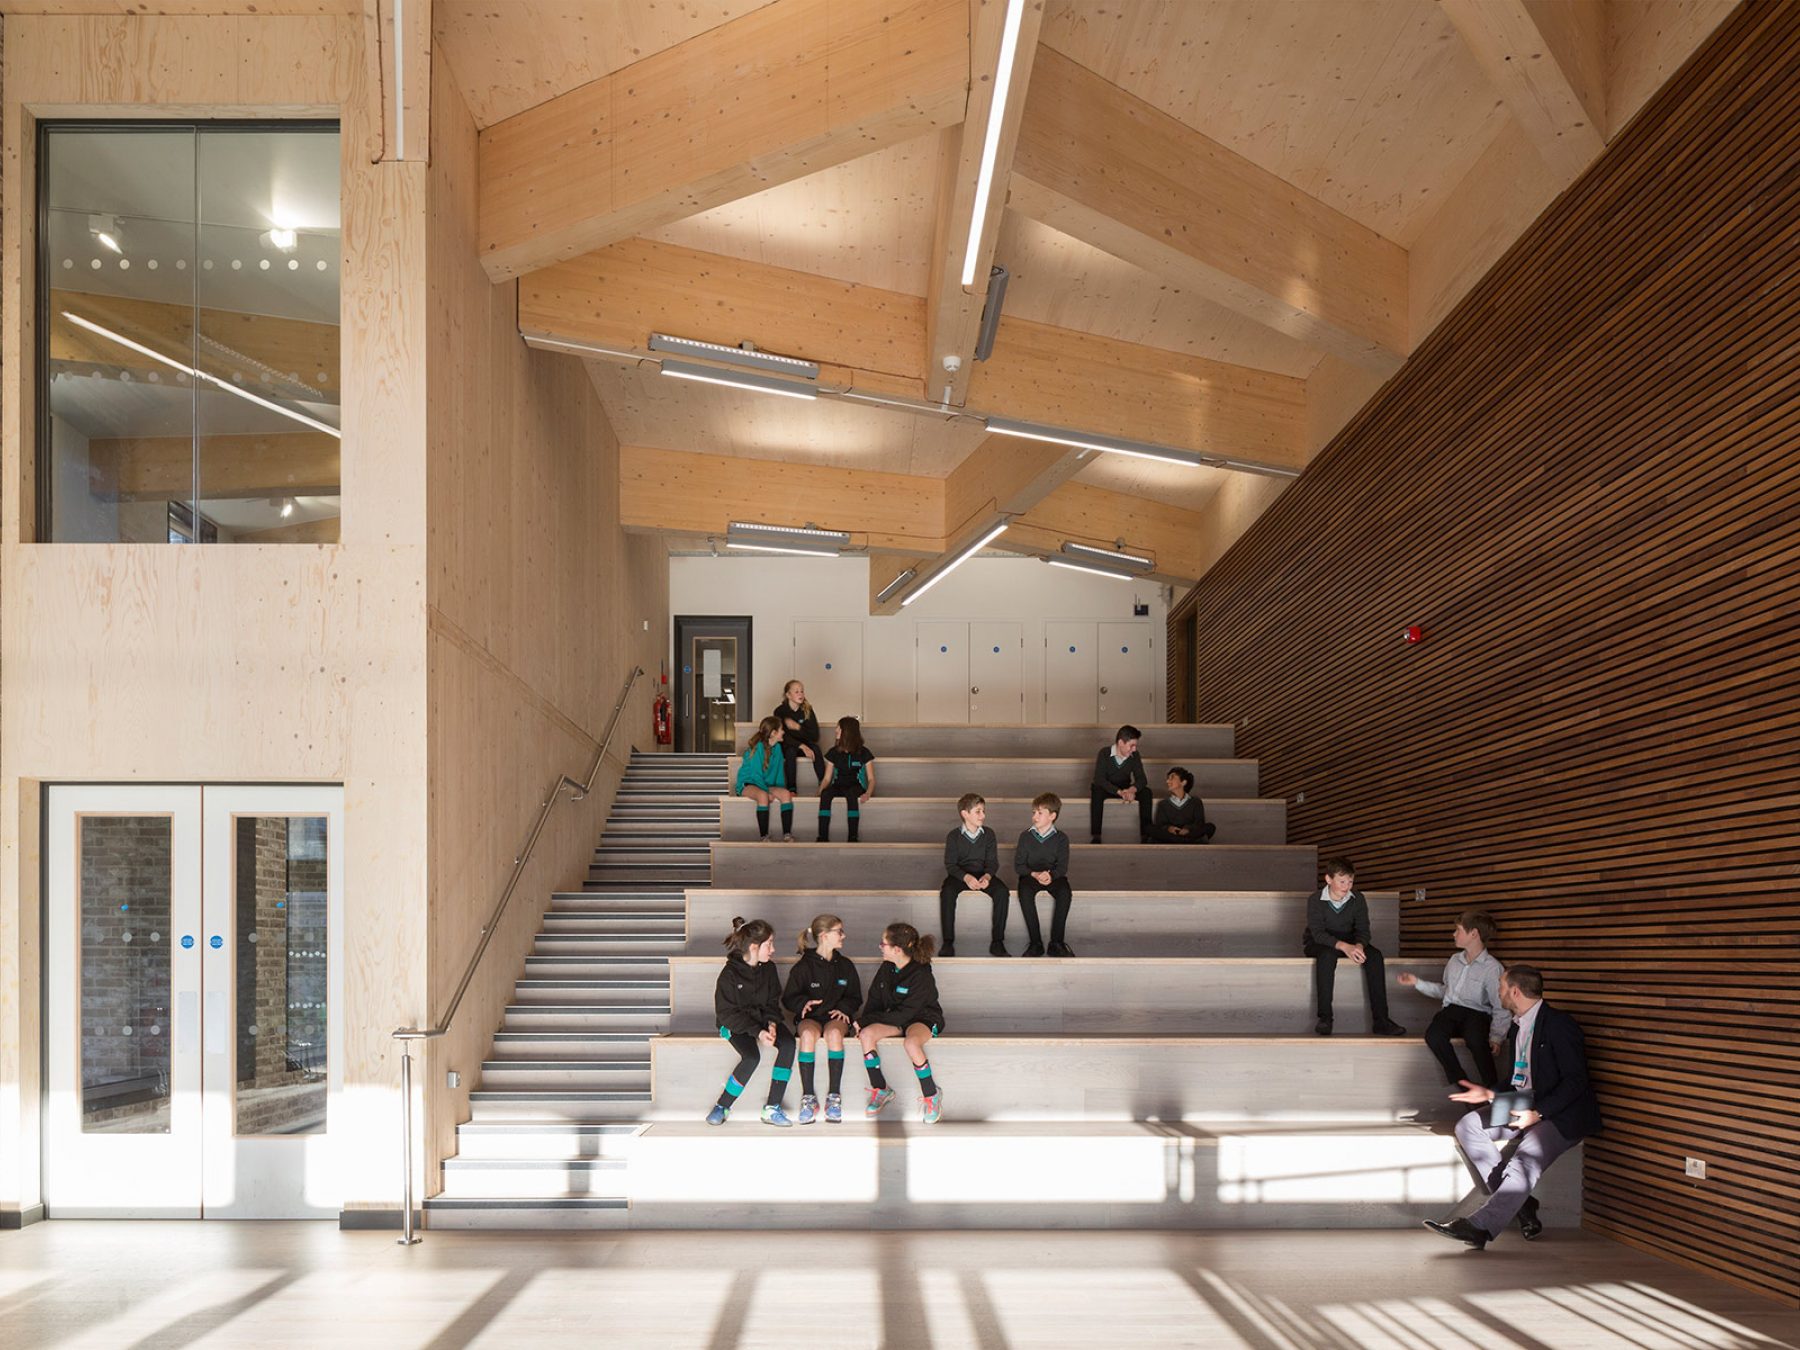 Interior stepped seating with sports learning school | CDC studio cambridge architects, with students conversing.